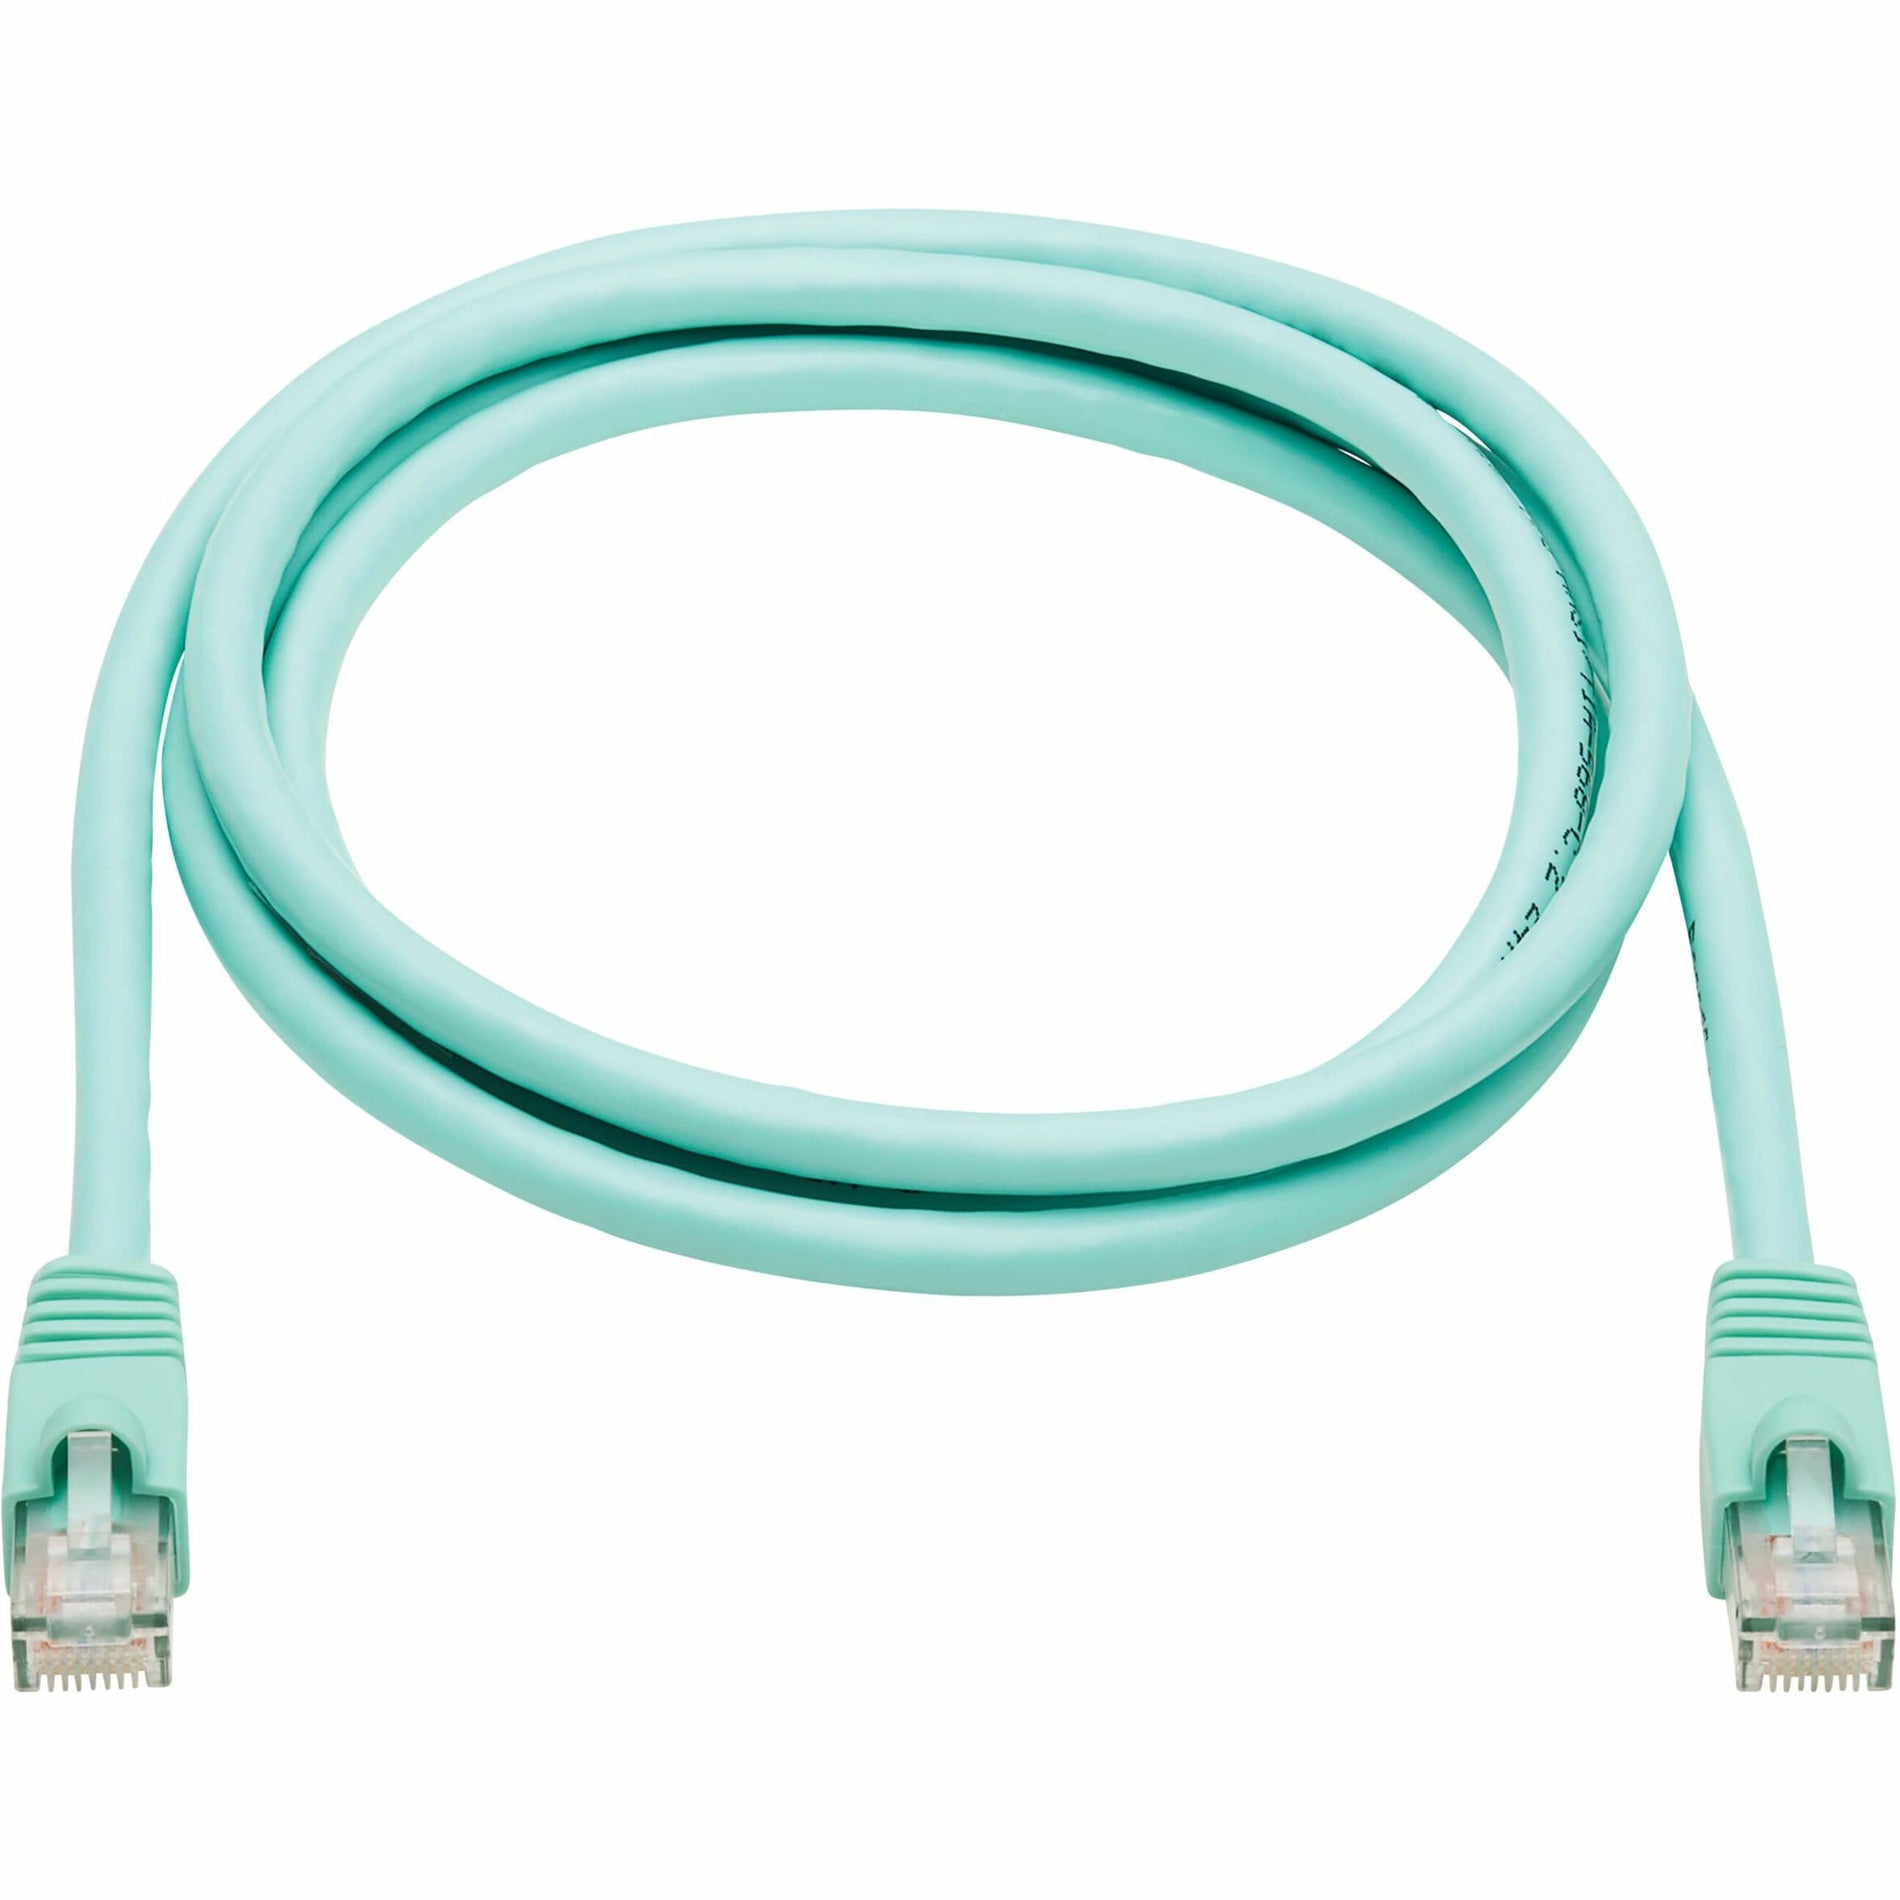 Tripp Lite N261-005-AQ 5-ft. Cat6a Aqua Patch Cable, 10 Gbit/s Data Transfer Rate, Strain Relief, Snagless